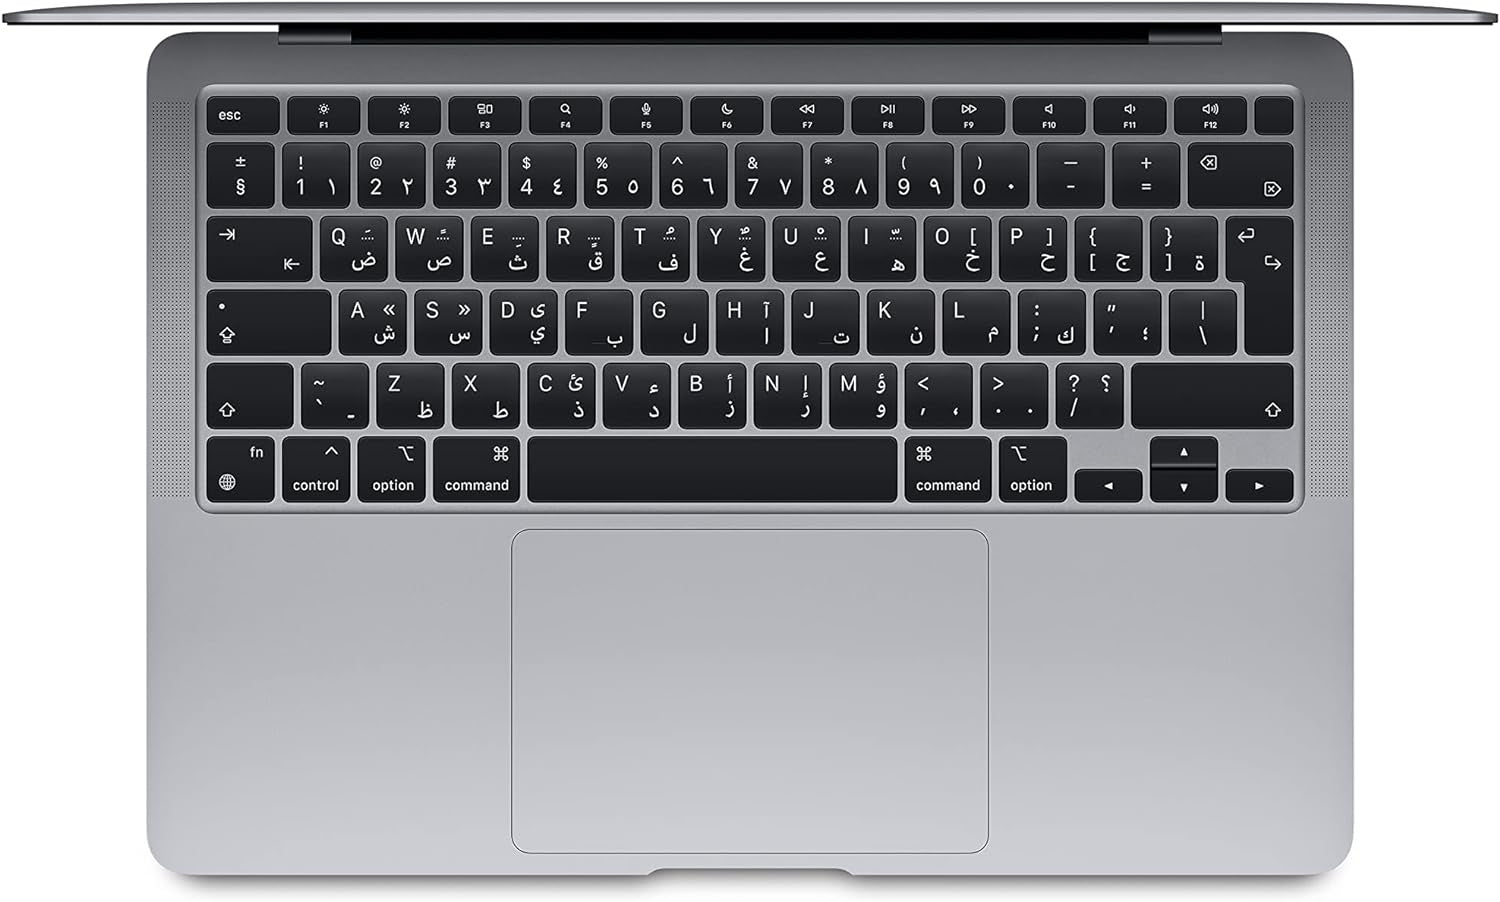 Apple 2020 MacBook Air Laptop: Apple M1 Chip, 13” Retina Display, 8GB RAM, 256GB SSD Storage, Backlit Keyboard, FaceTime HD Camera, Touch ID. Works with iPhone/iPad; Space Gray ; Arabic/English